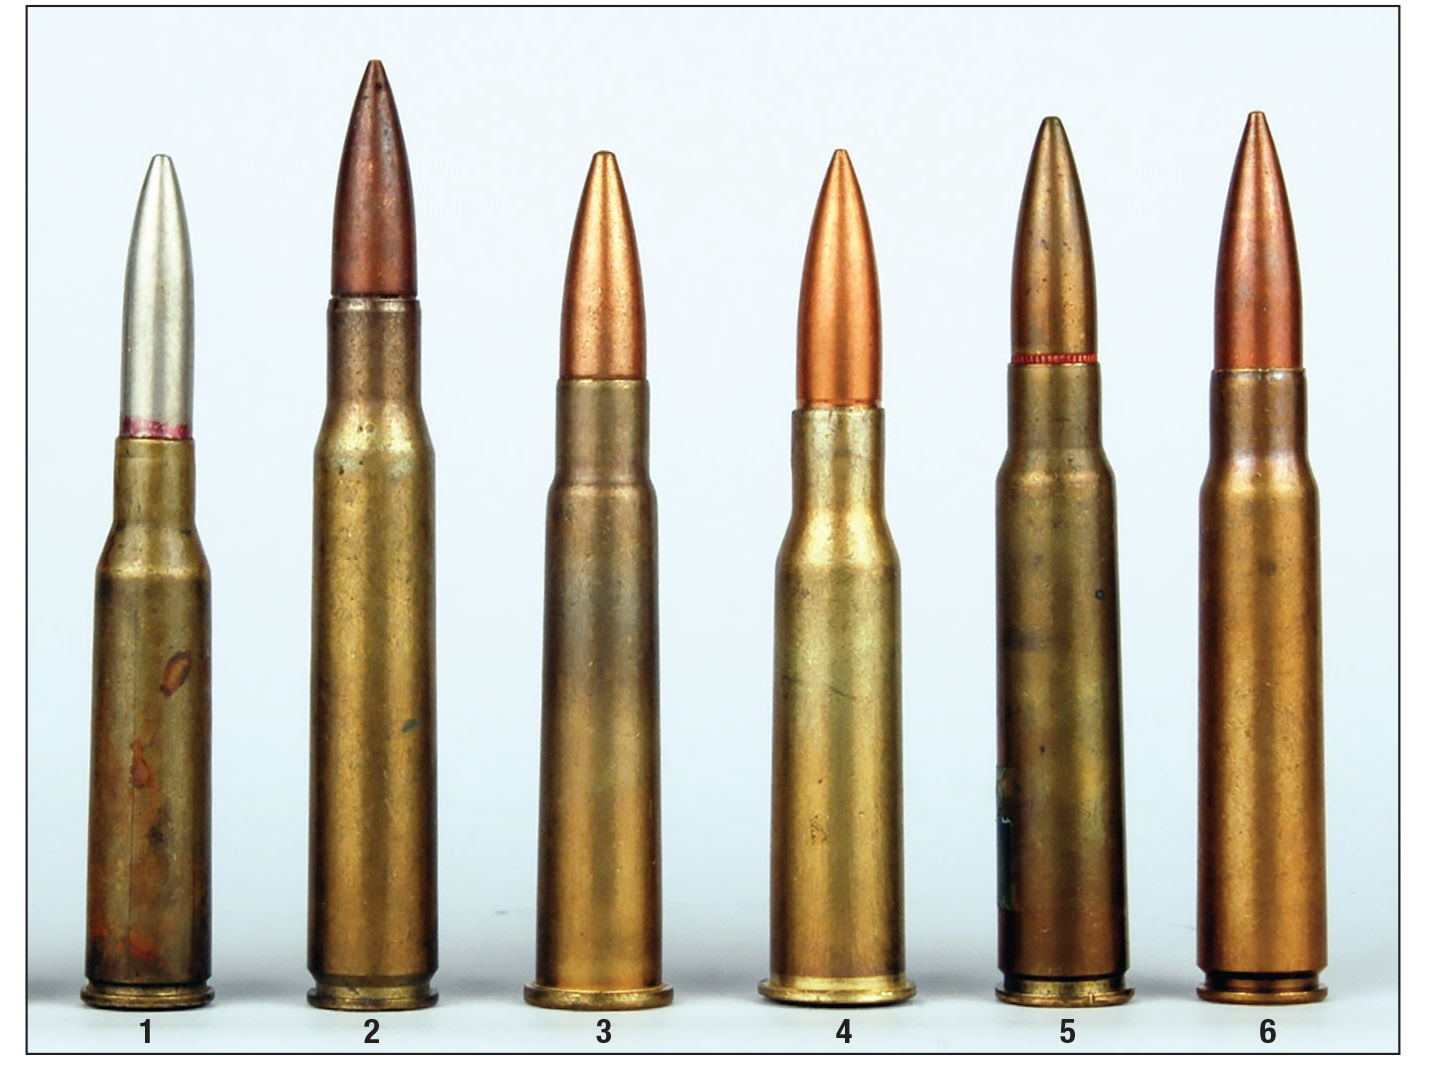 The (1) 6.5mm Japanese round used in Type 38/97s is shown with other nations’ World War II basic infantry cartridges: (2) U.S. 30-06, (3) British 303, (4) Soviet Union 7.62x54mm, (5) Japanese 7.7x58mm and (6) German 7.9x57mm.